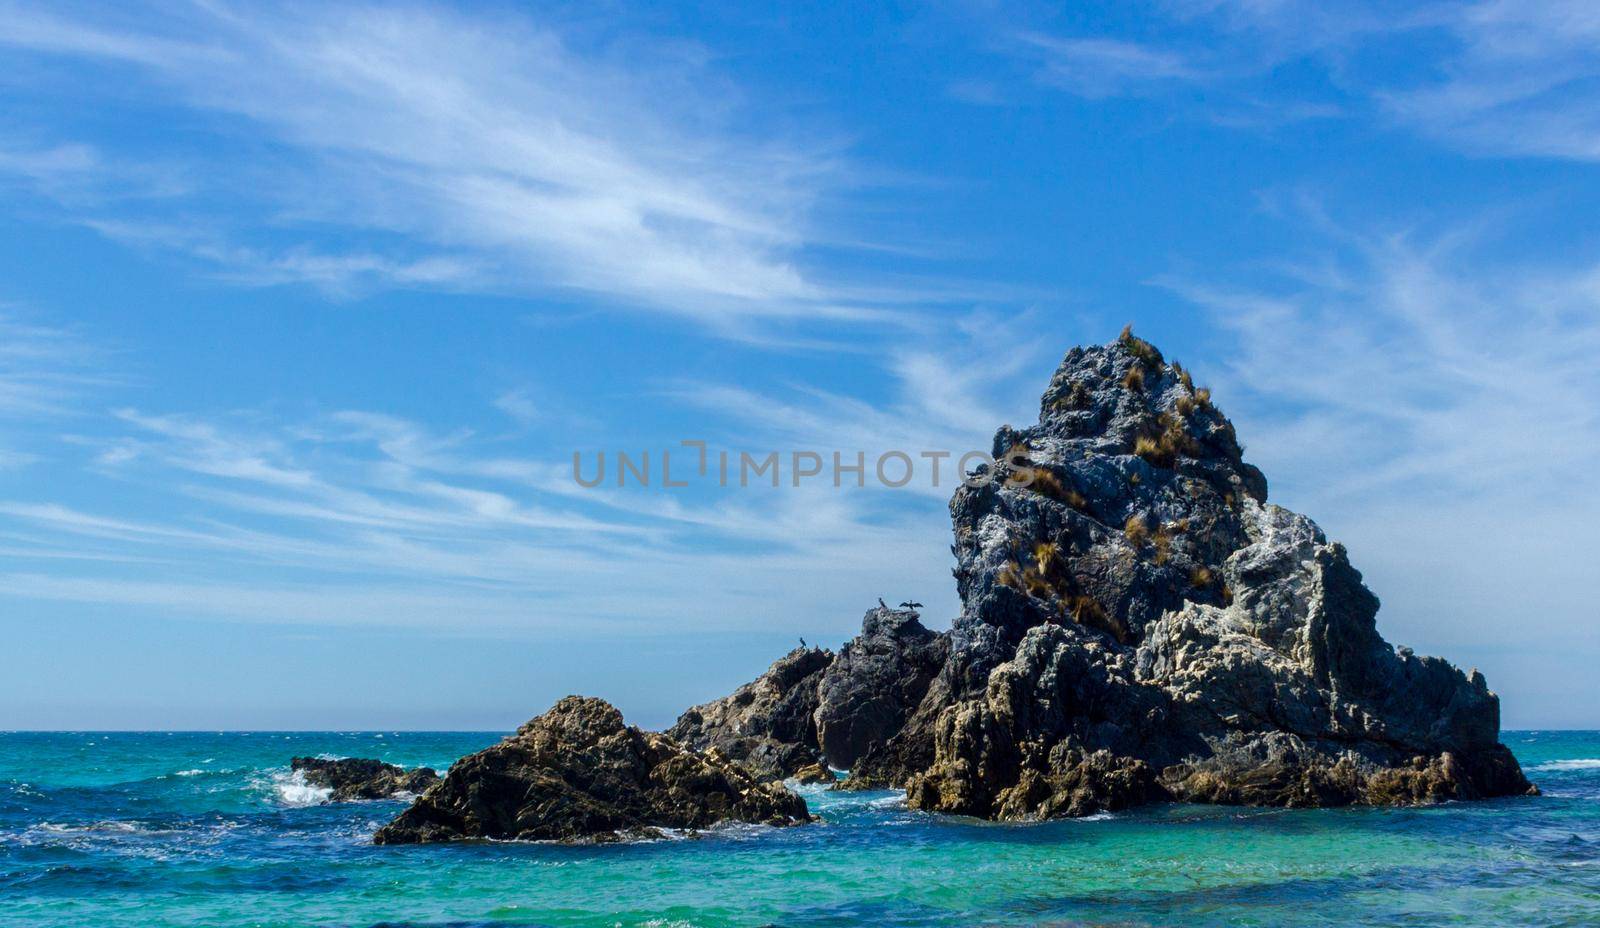 Camel rock A formation of rocks that look like a camel sitting down on the beach, situated on the far south coast Town of Bermagui in NSW Australia, famous for big game fishing and beaches.